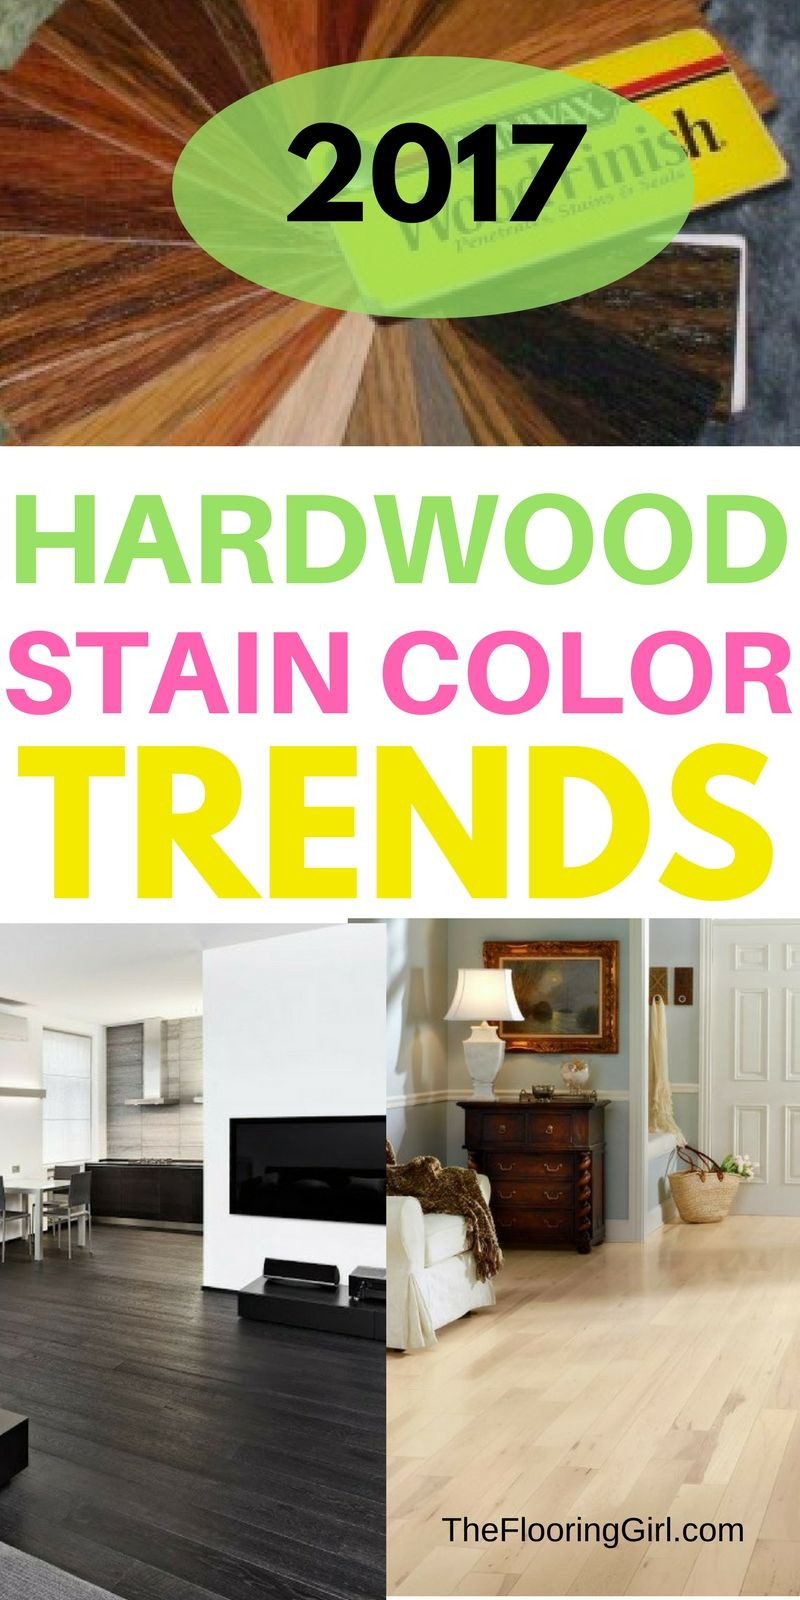 10 Unique Dark Oak Hardwood Floors 2024 free download dark oak hardwood floors of hardwood flooring stain color trends 2018 more from the flooring with regard to hardwood flooring stain color trends for 2017 hardwood colors that are in style th